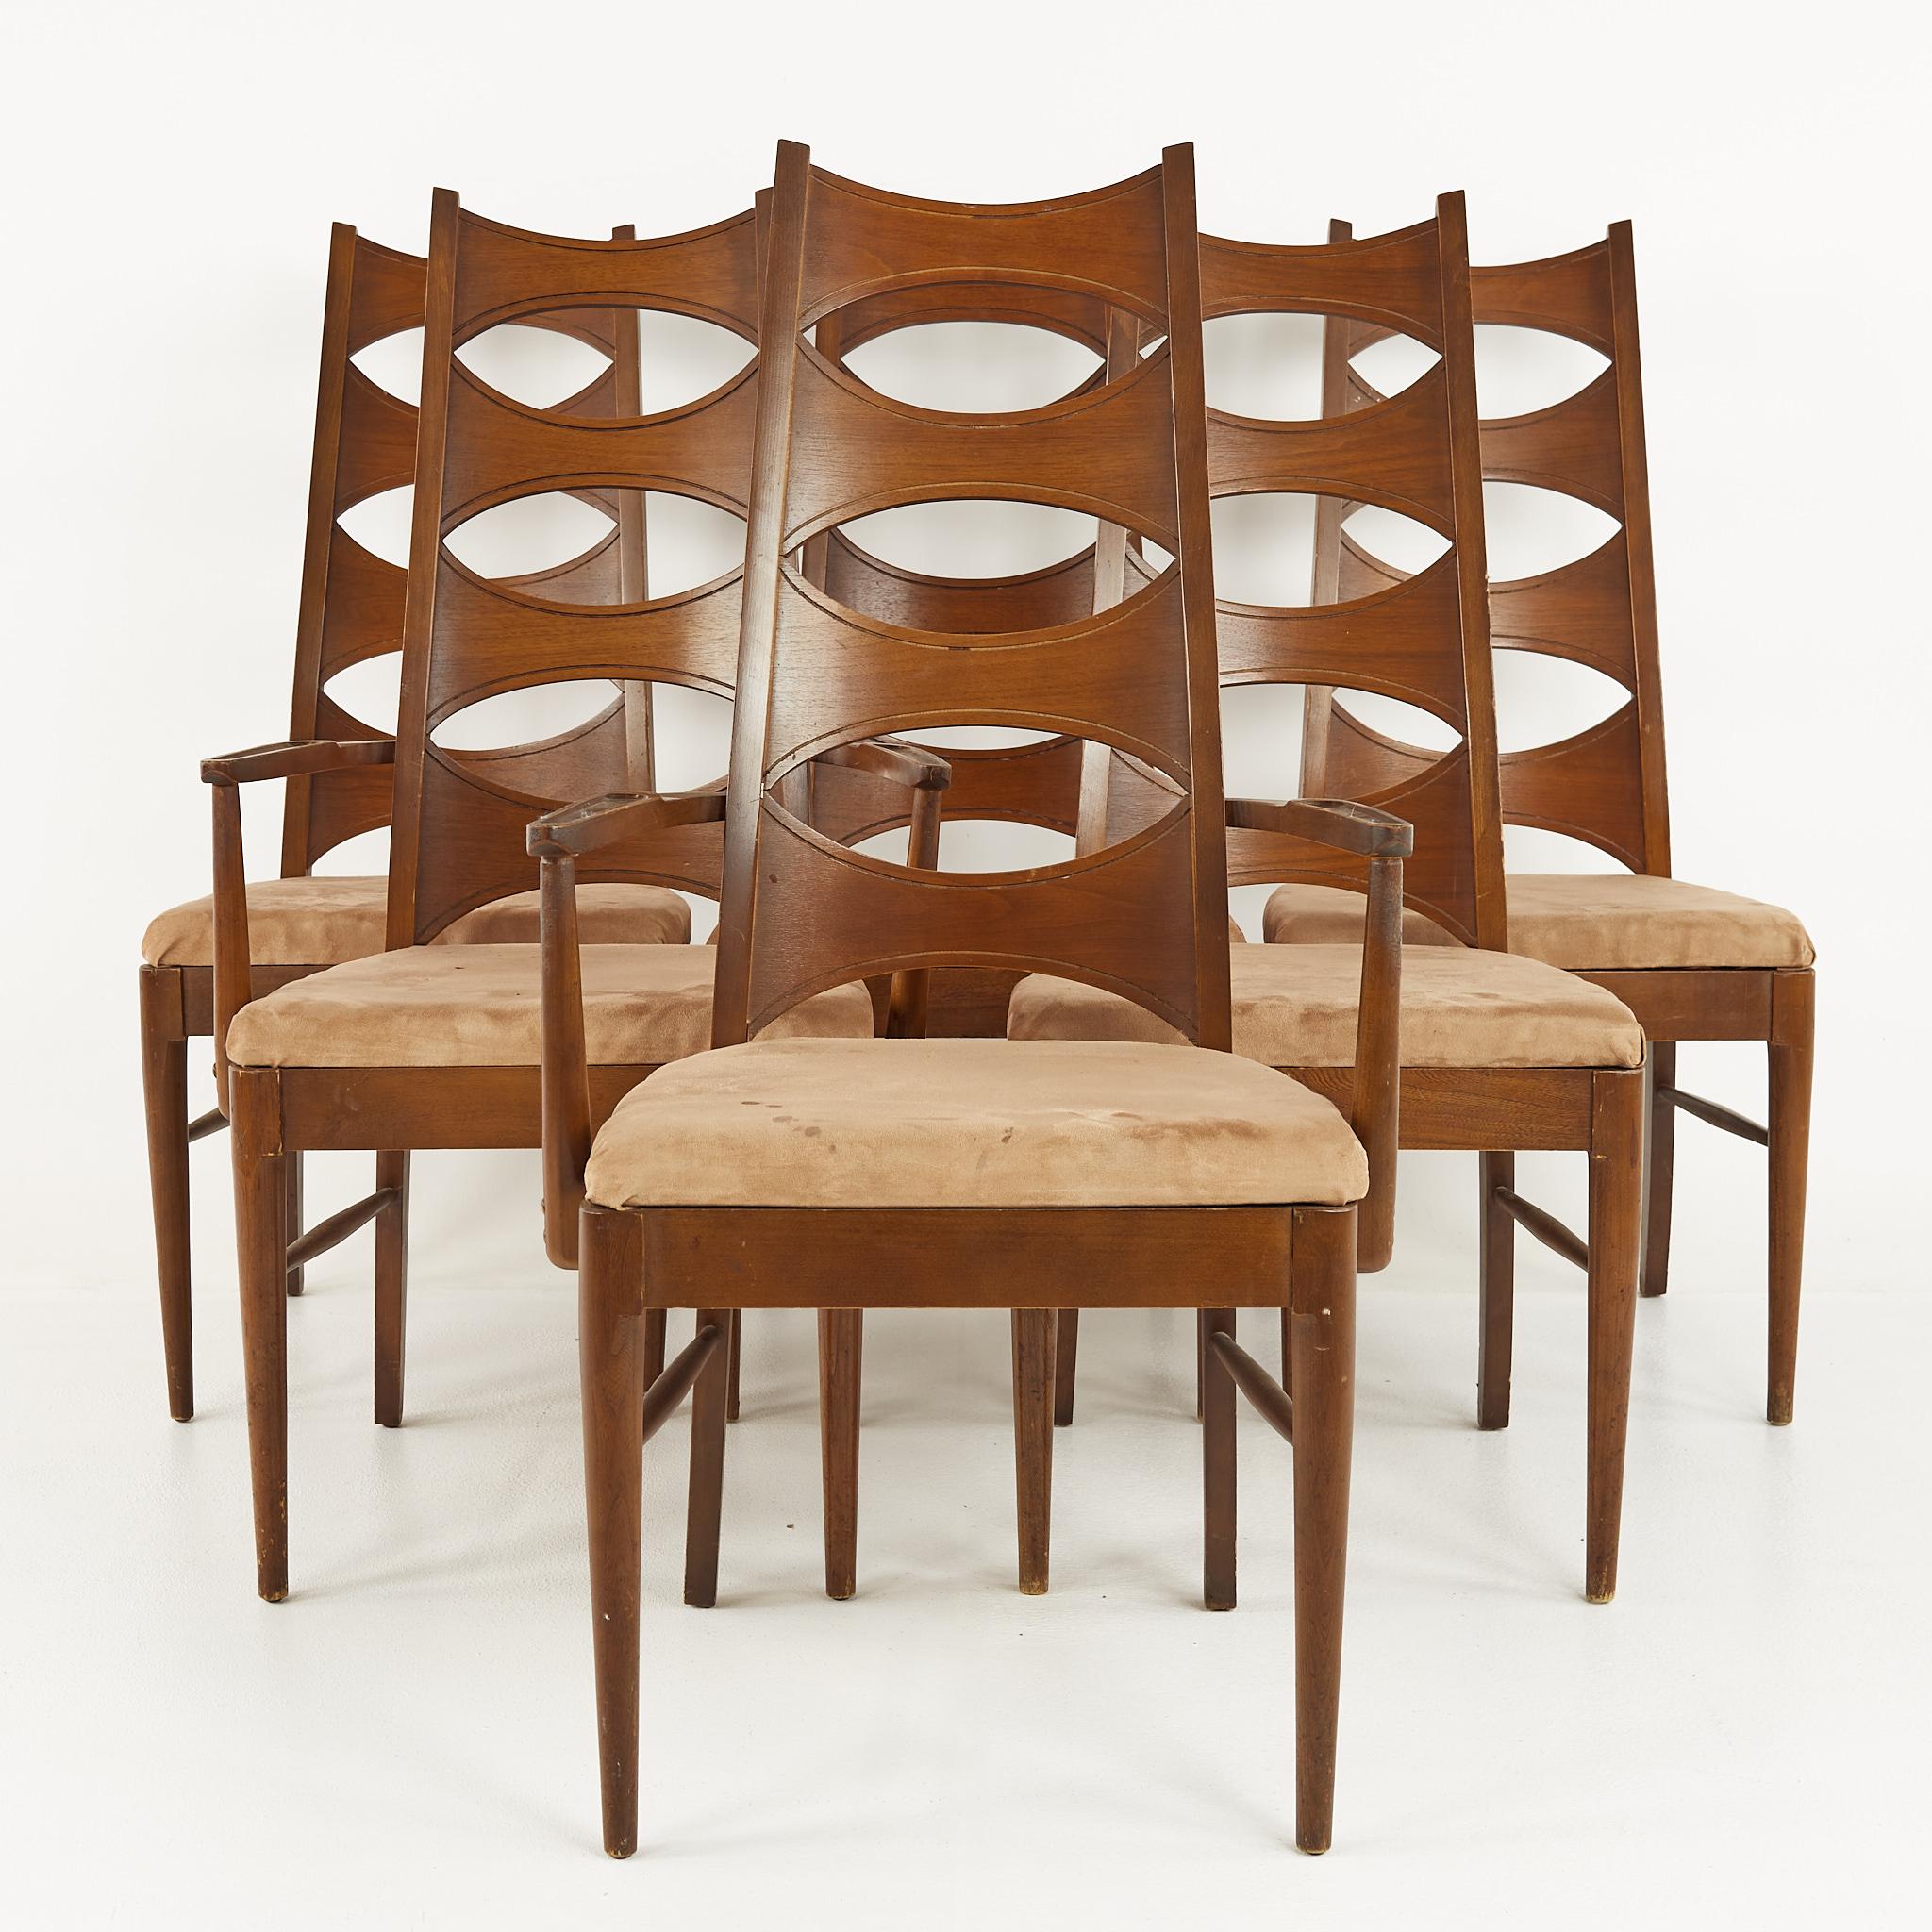 Kent Coffey Perspecta mid century walnut dining chairs - set of 6

Each chair measures: 19.5 wide x 18.5 deep x 45 inches high, with a seat height of 19 and arm height of 26 inches

Each captain chair measures: 22.5 wide x 18.5 deep x 45 inches